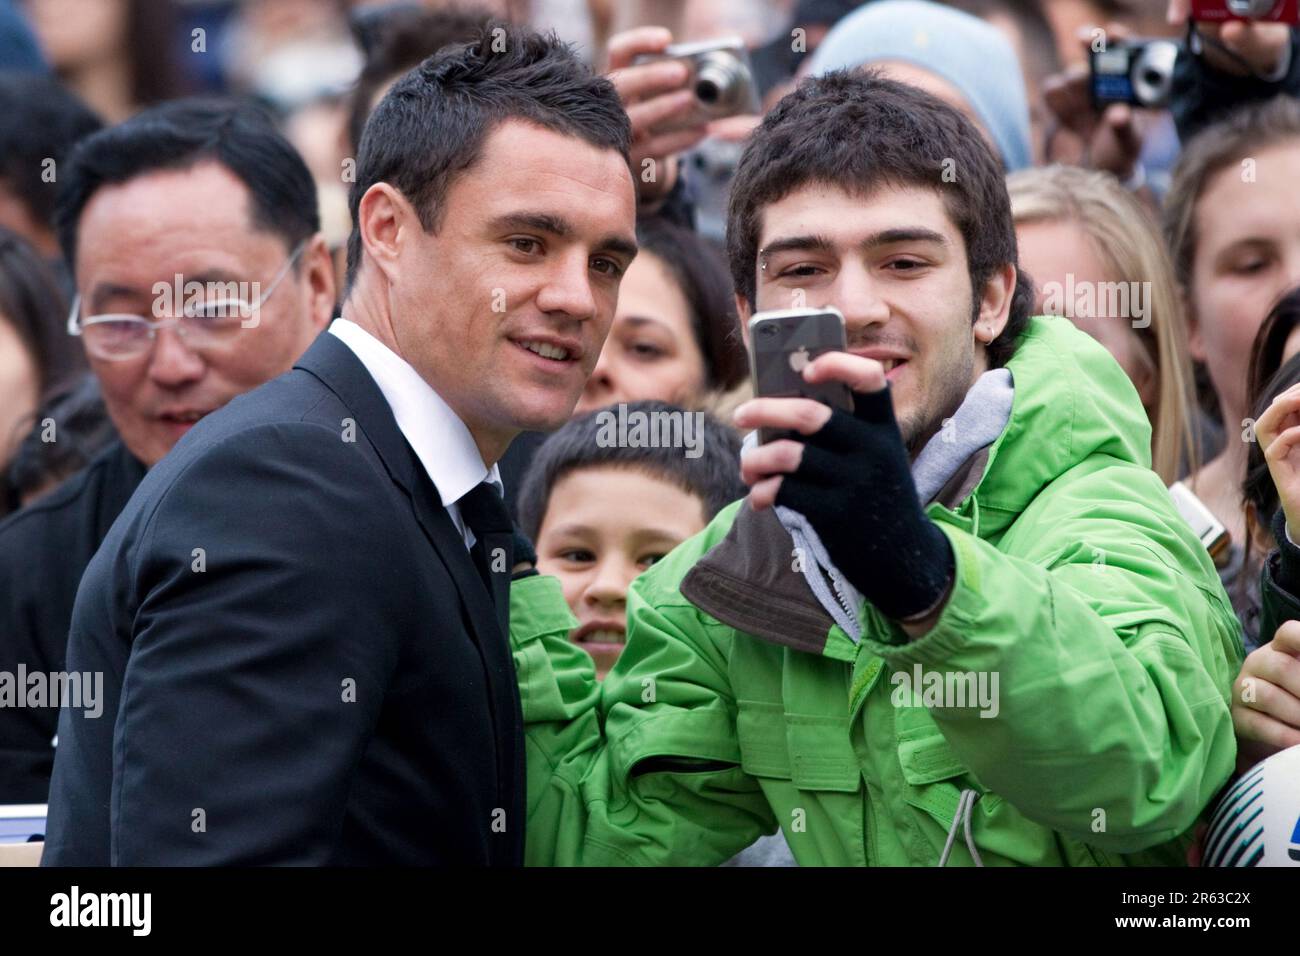 Dan Carter poses for his photograph with a supporter at the official welcome for the New Zealand Rugby World Cup Team, Aotea Square, Auckland, New Zealand, Saturday, September 03, 2011. Stock Photo